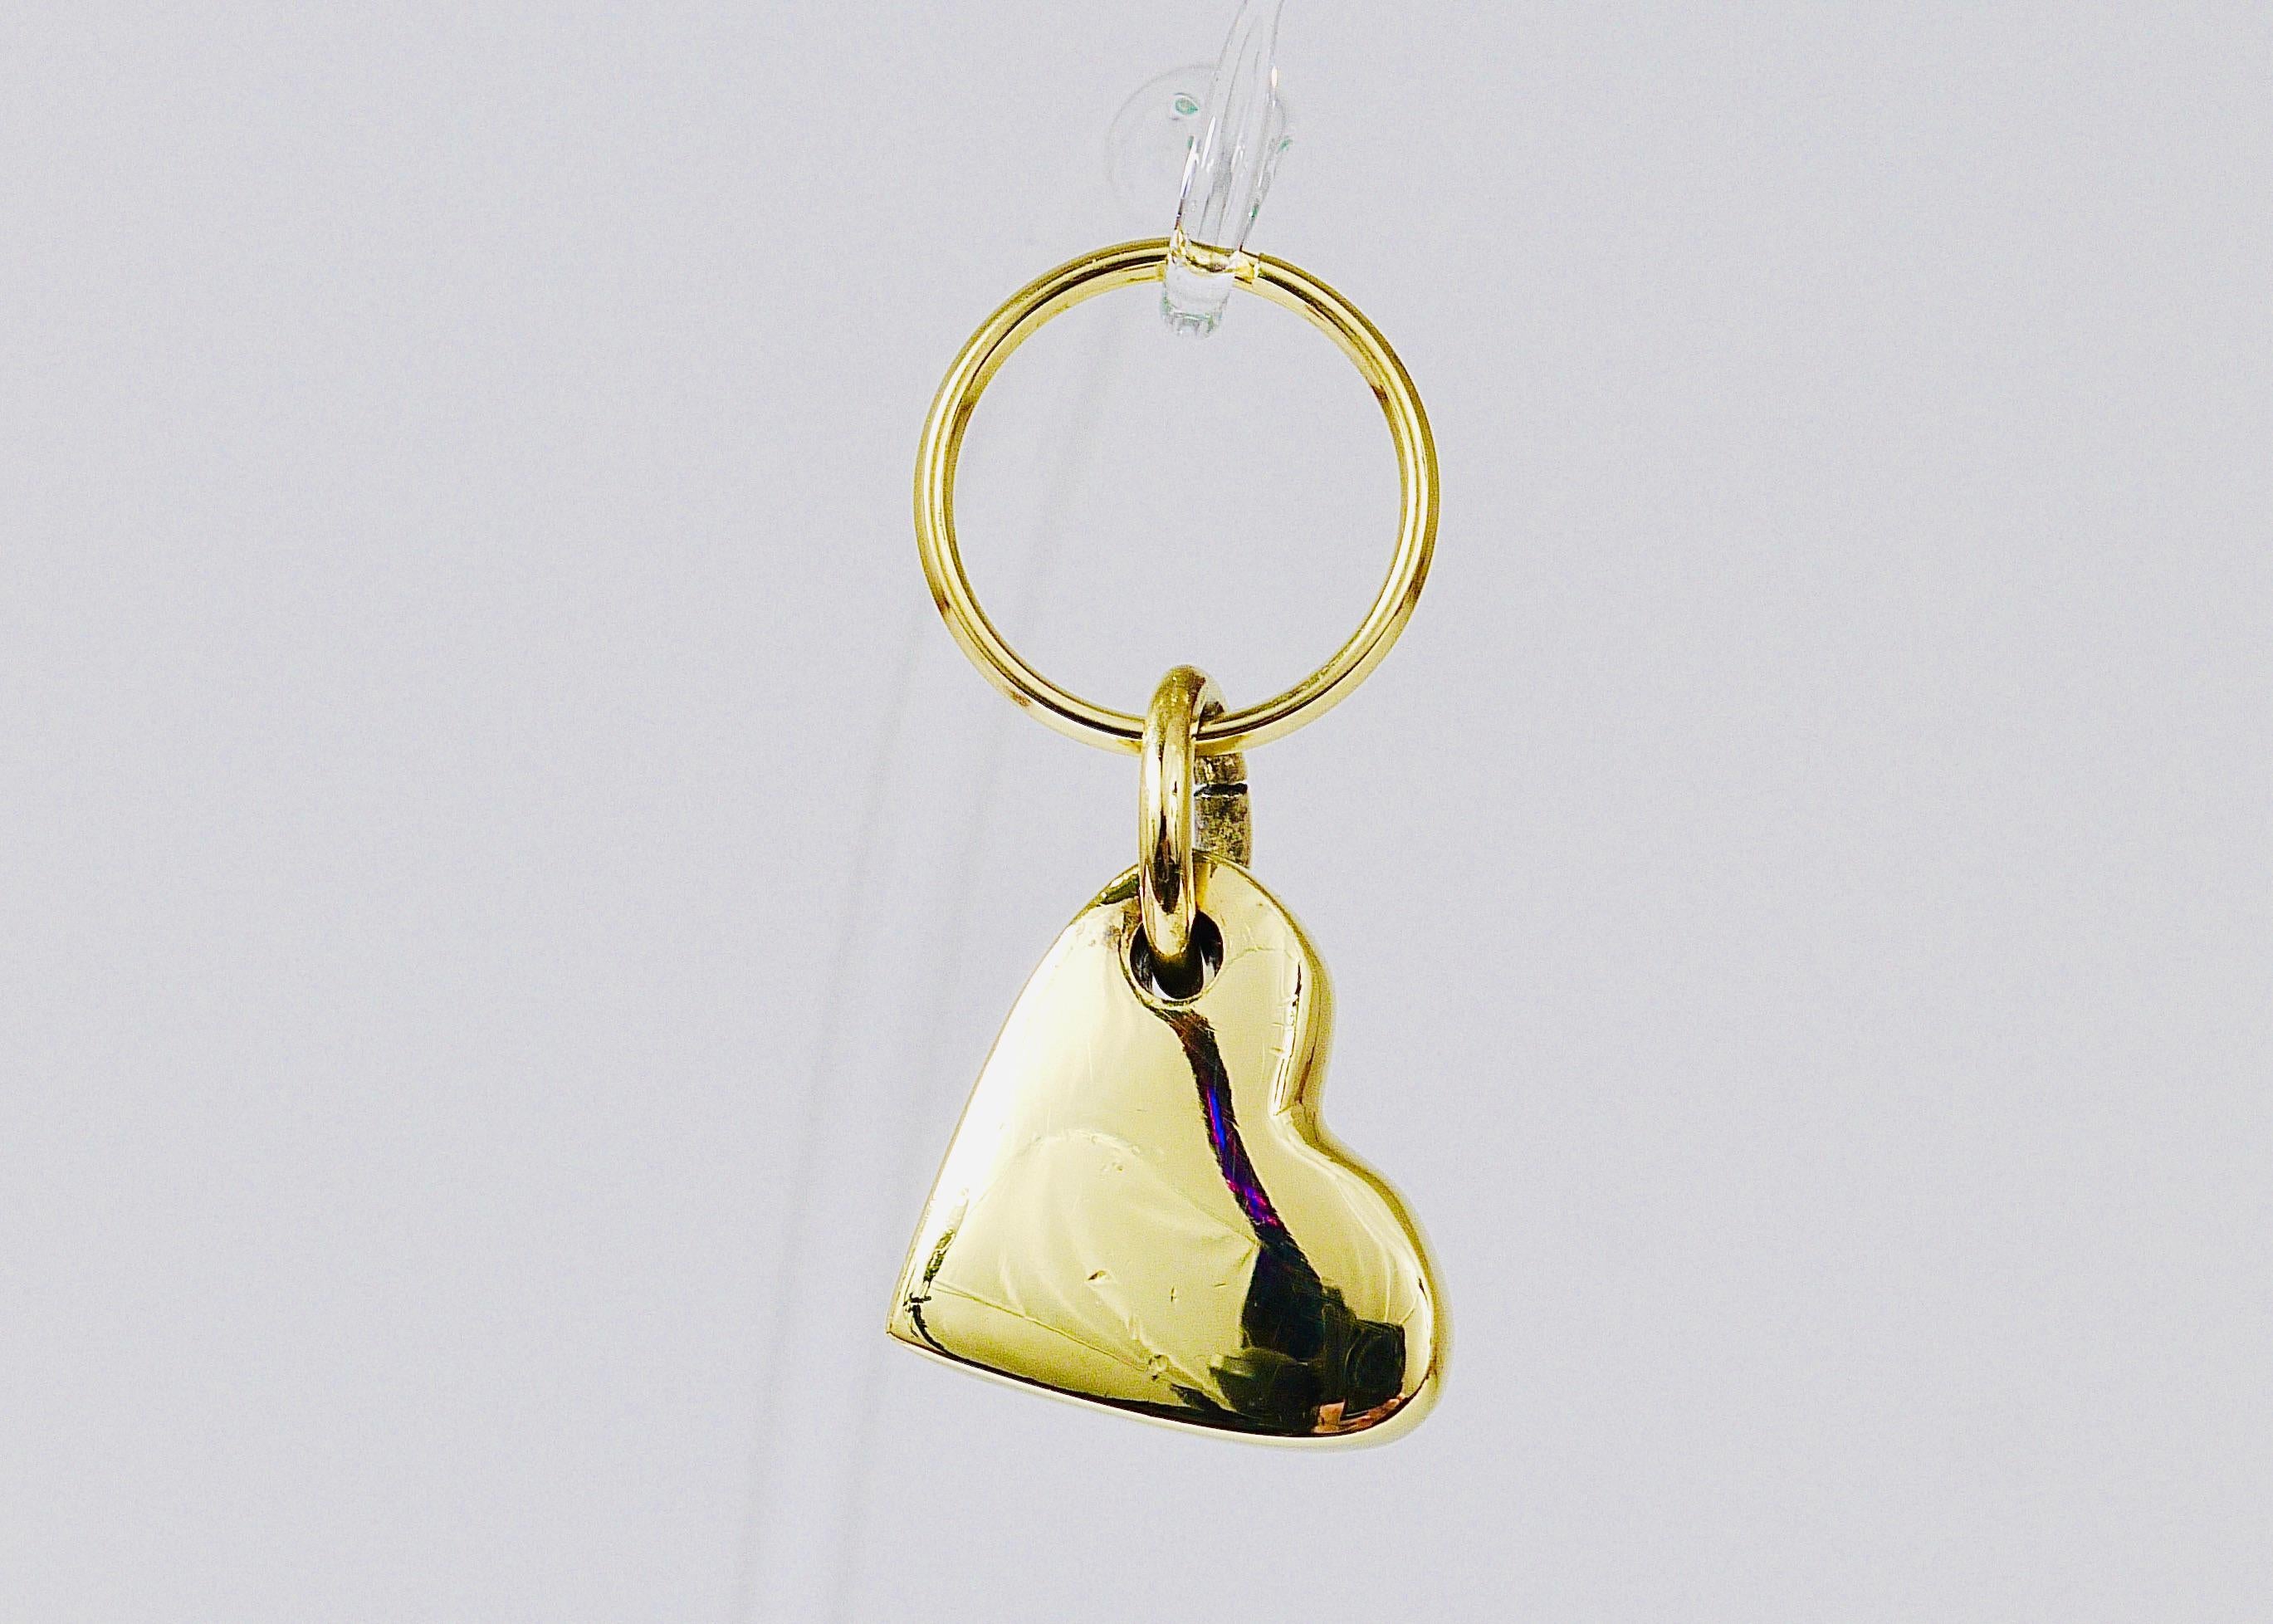 Polished Carl Auböck Handcrafted Midcentury Brass Heart Figurine Key Ring Chain Holder For Sale